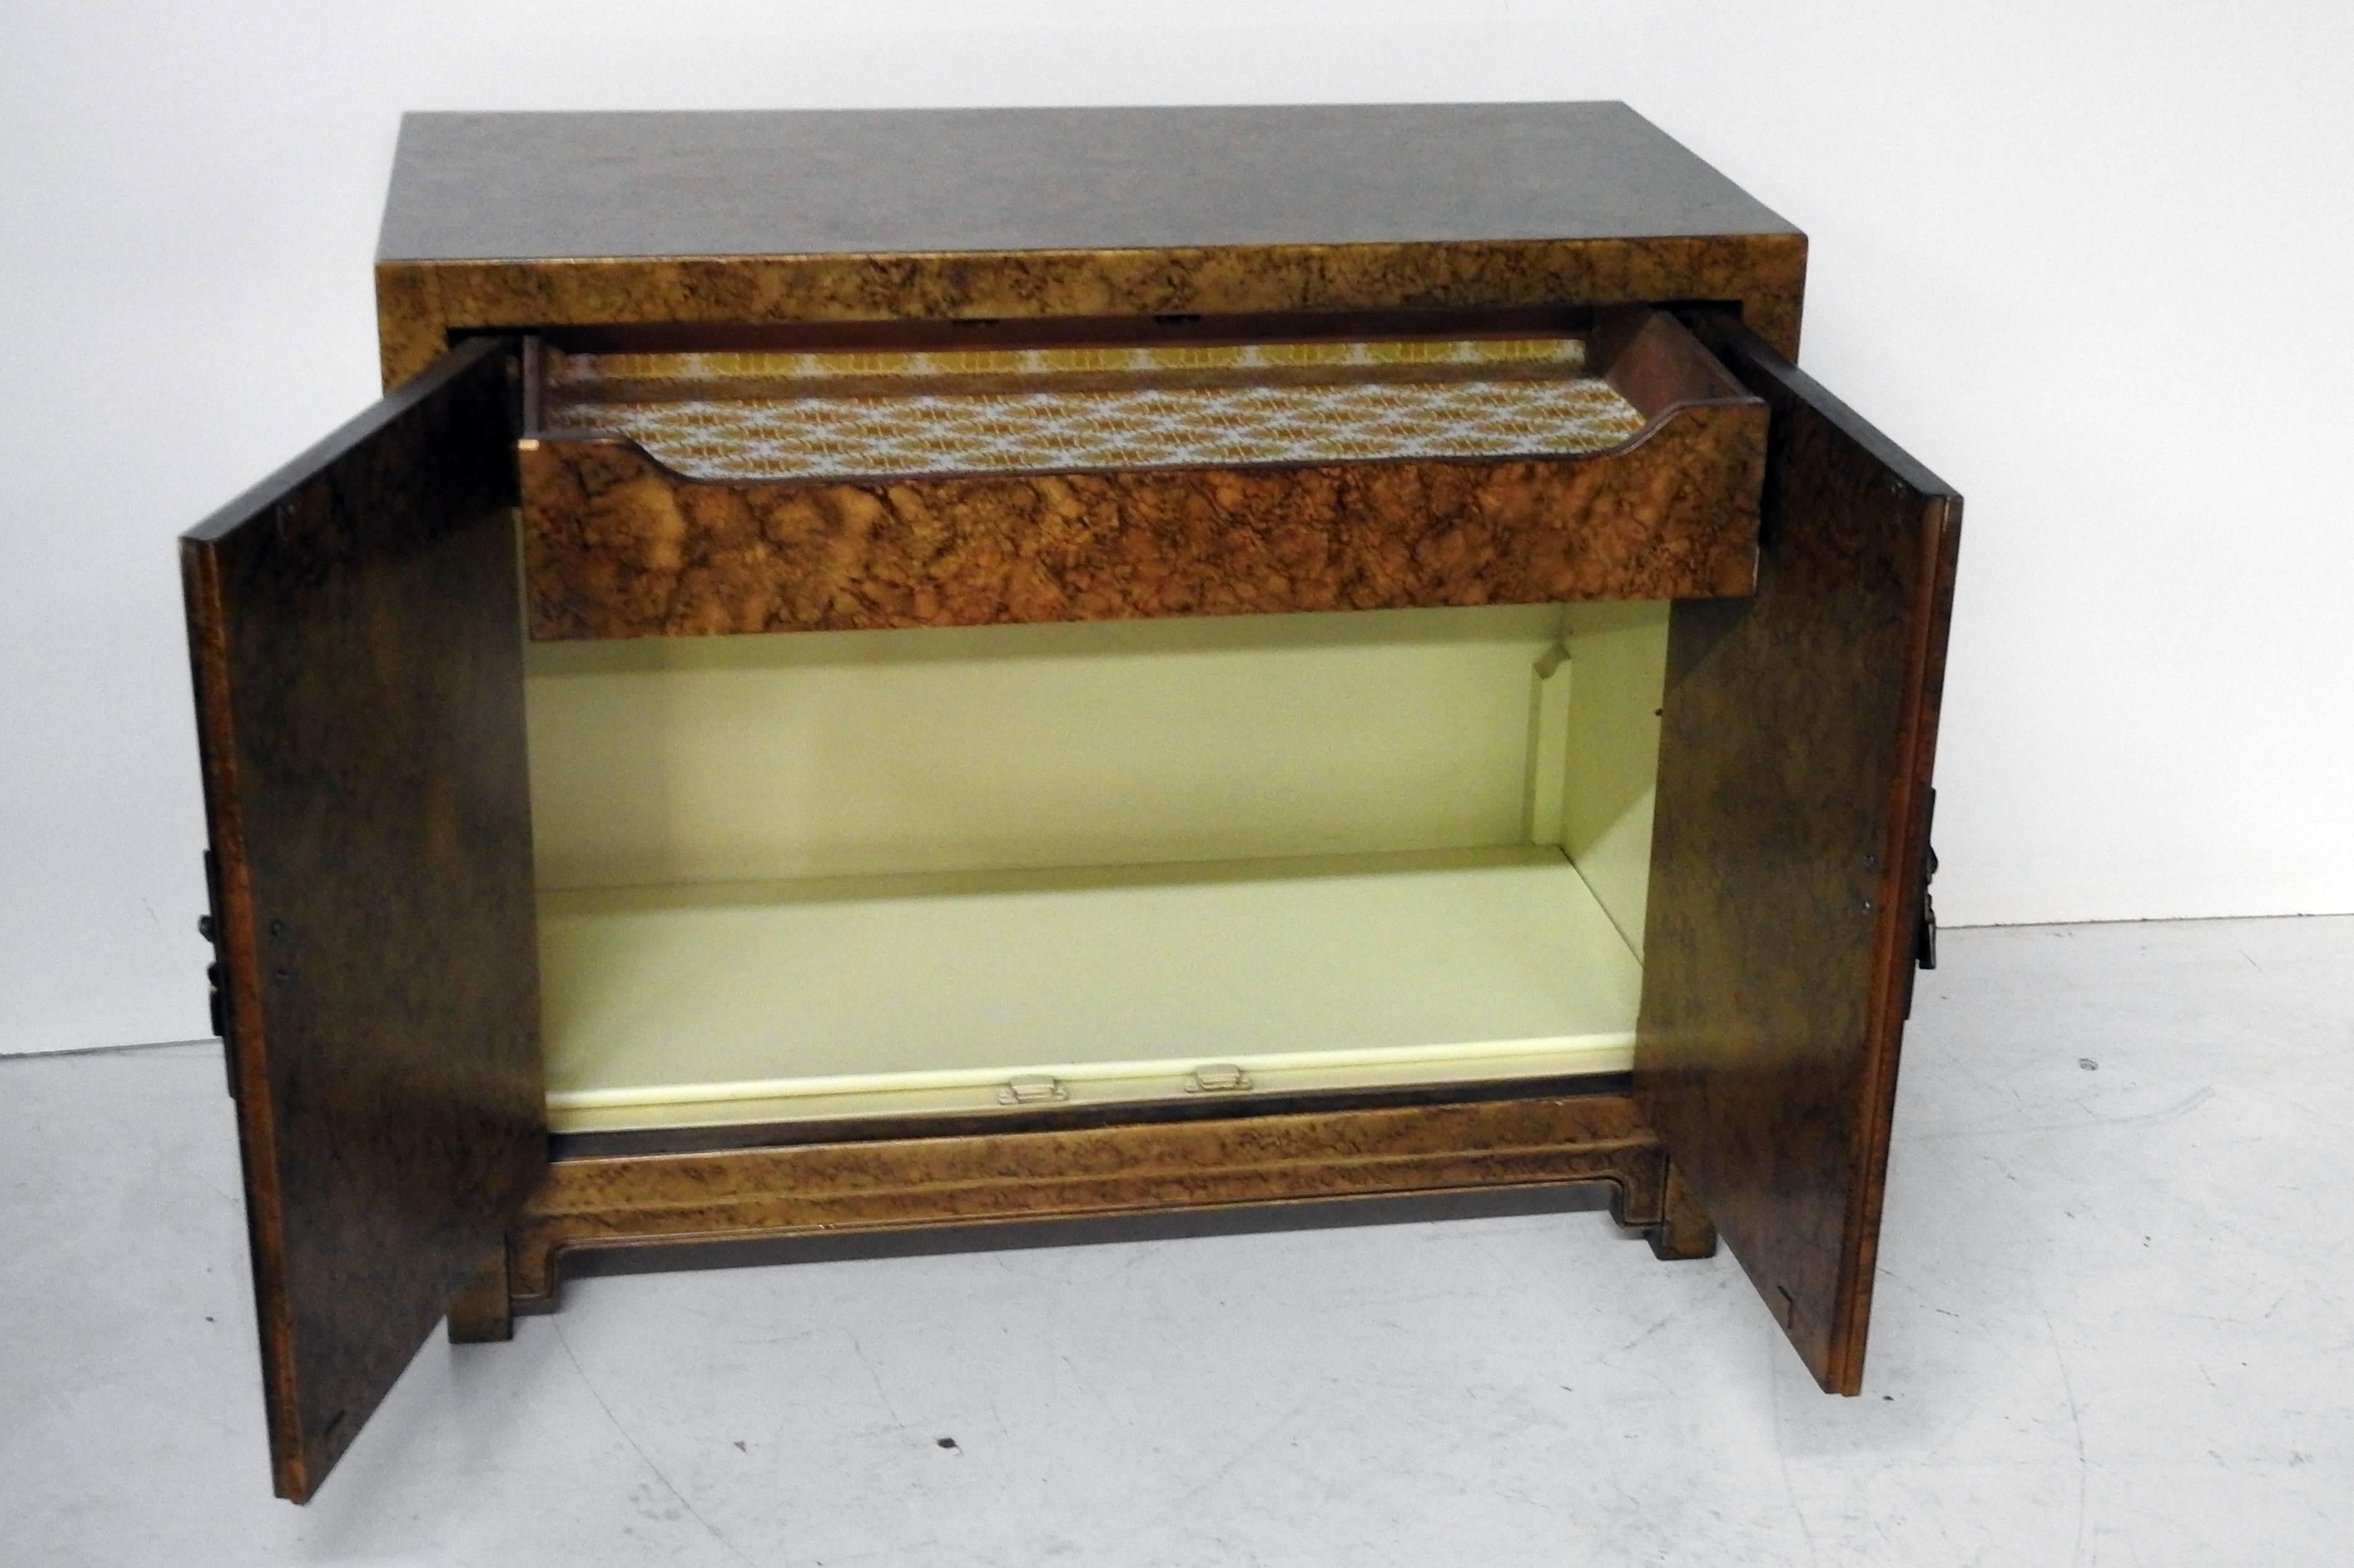 Vintage Henredon cabinet containing one drawer and one shelf with a faux tortoise shell veneer.